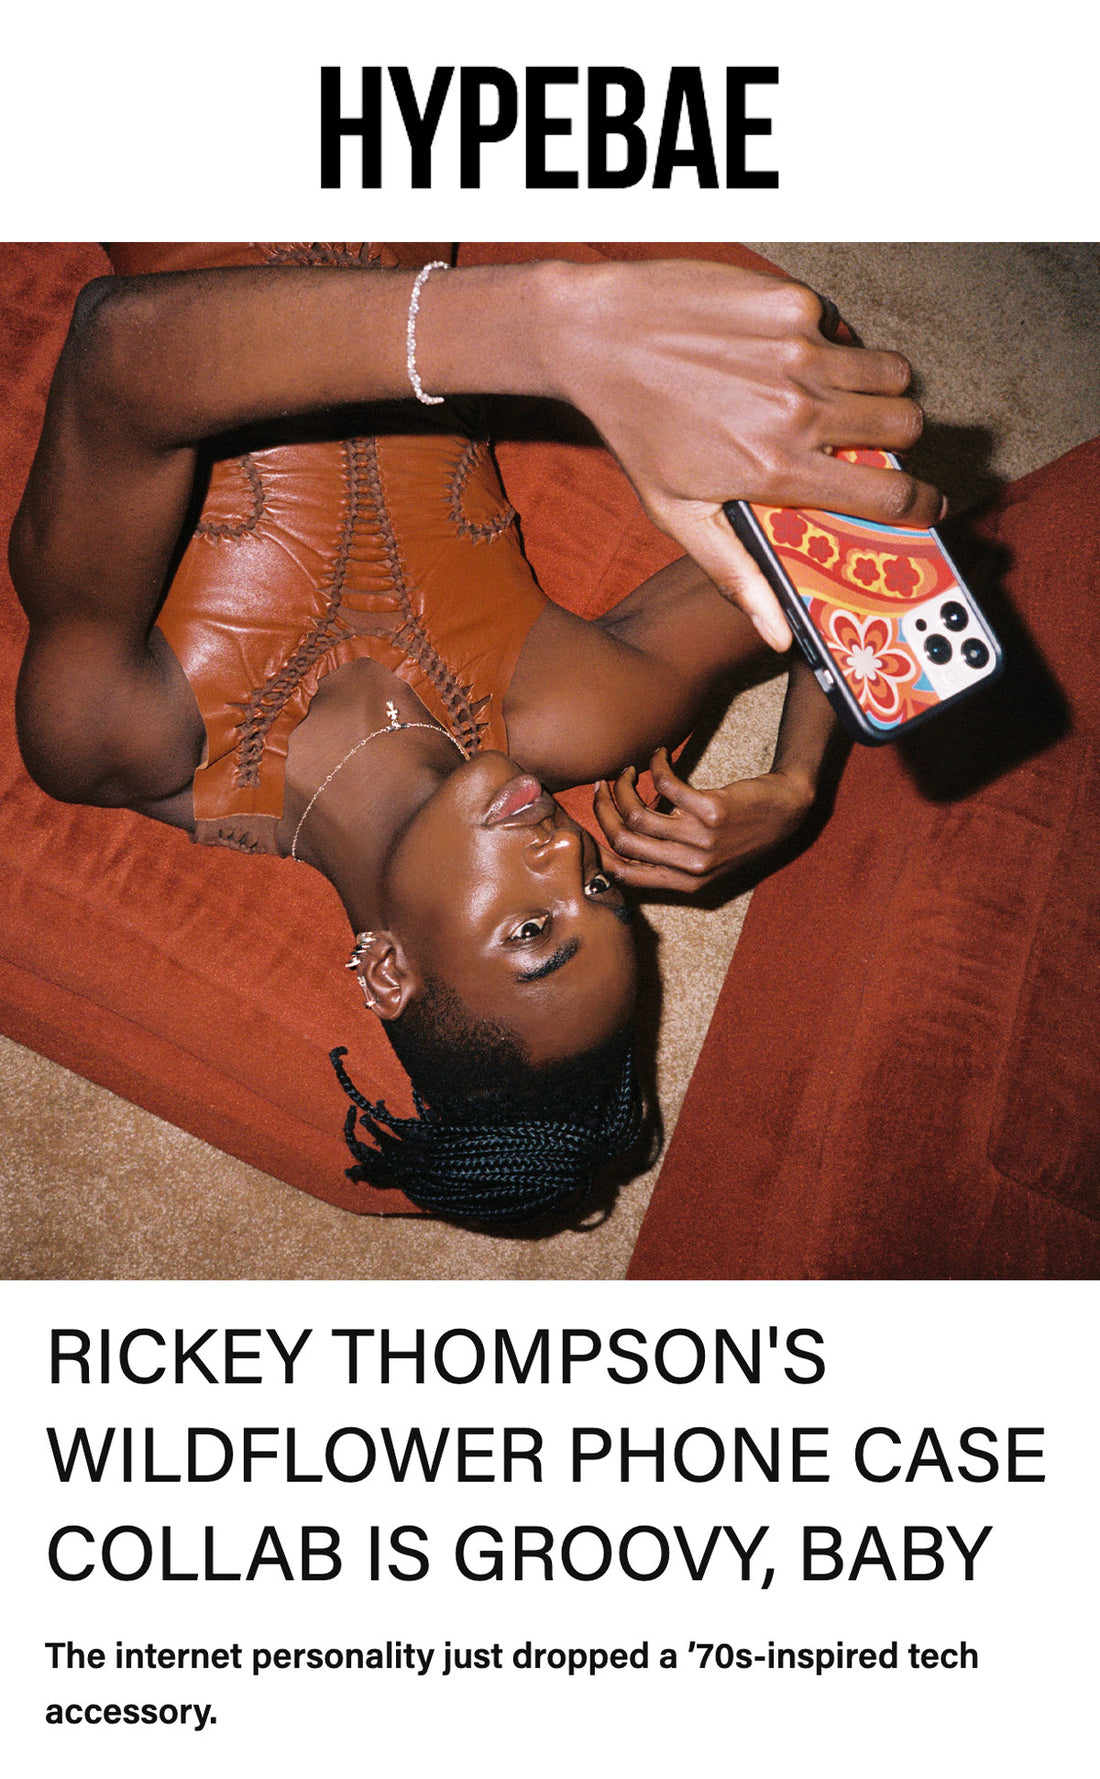 RICKEY THOMPSON'S WILDFLOWER PHONE CASE COLLAB IS GROOVY, BABY